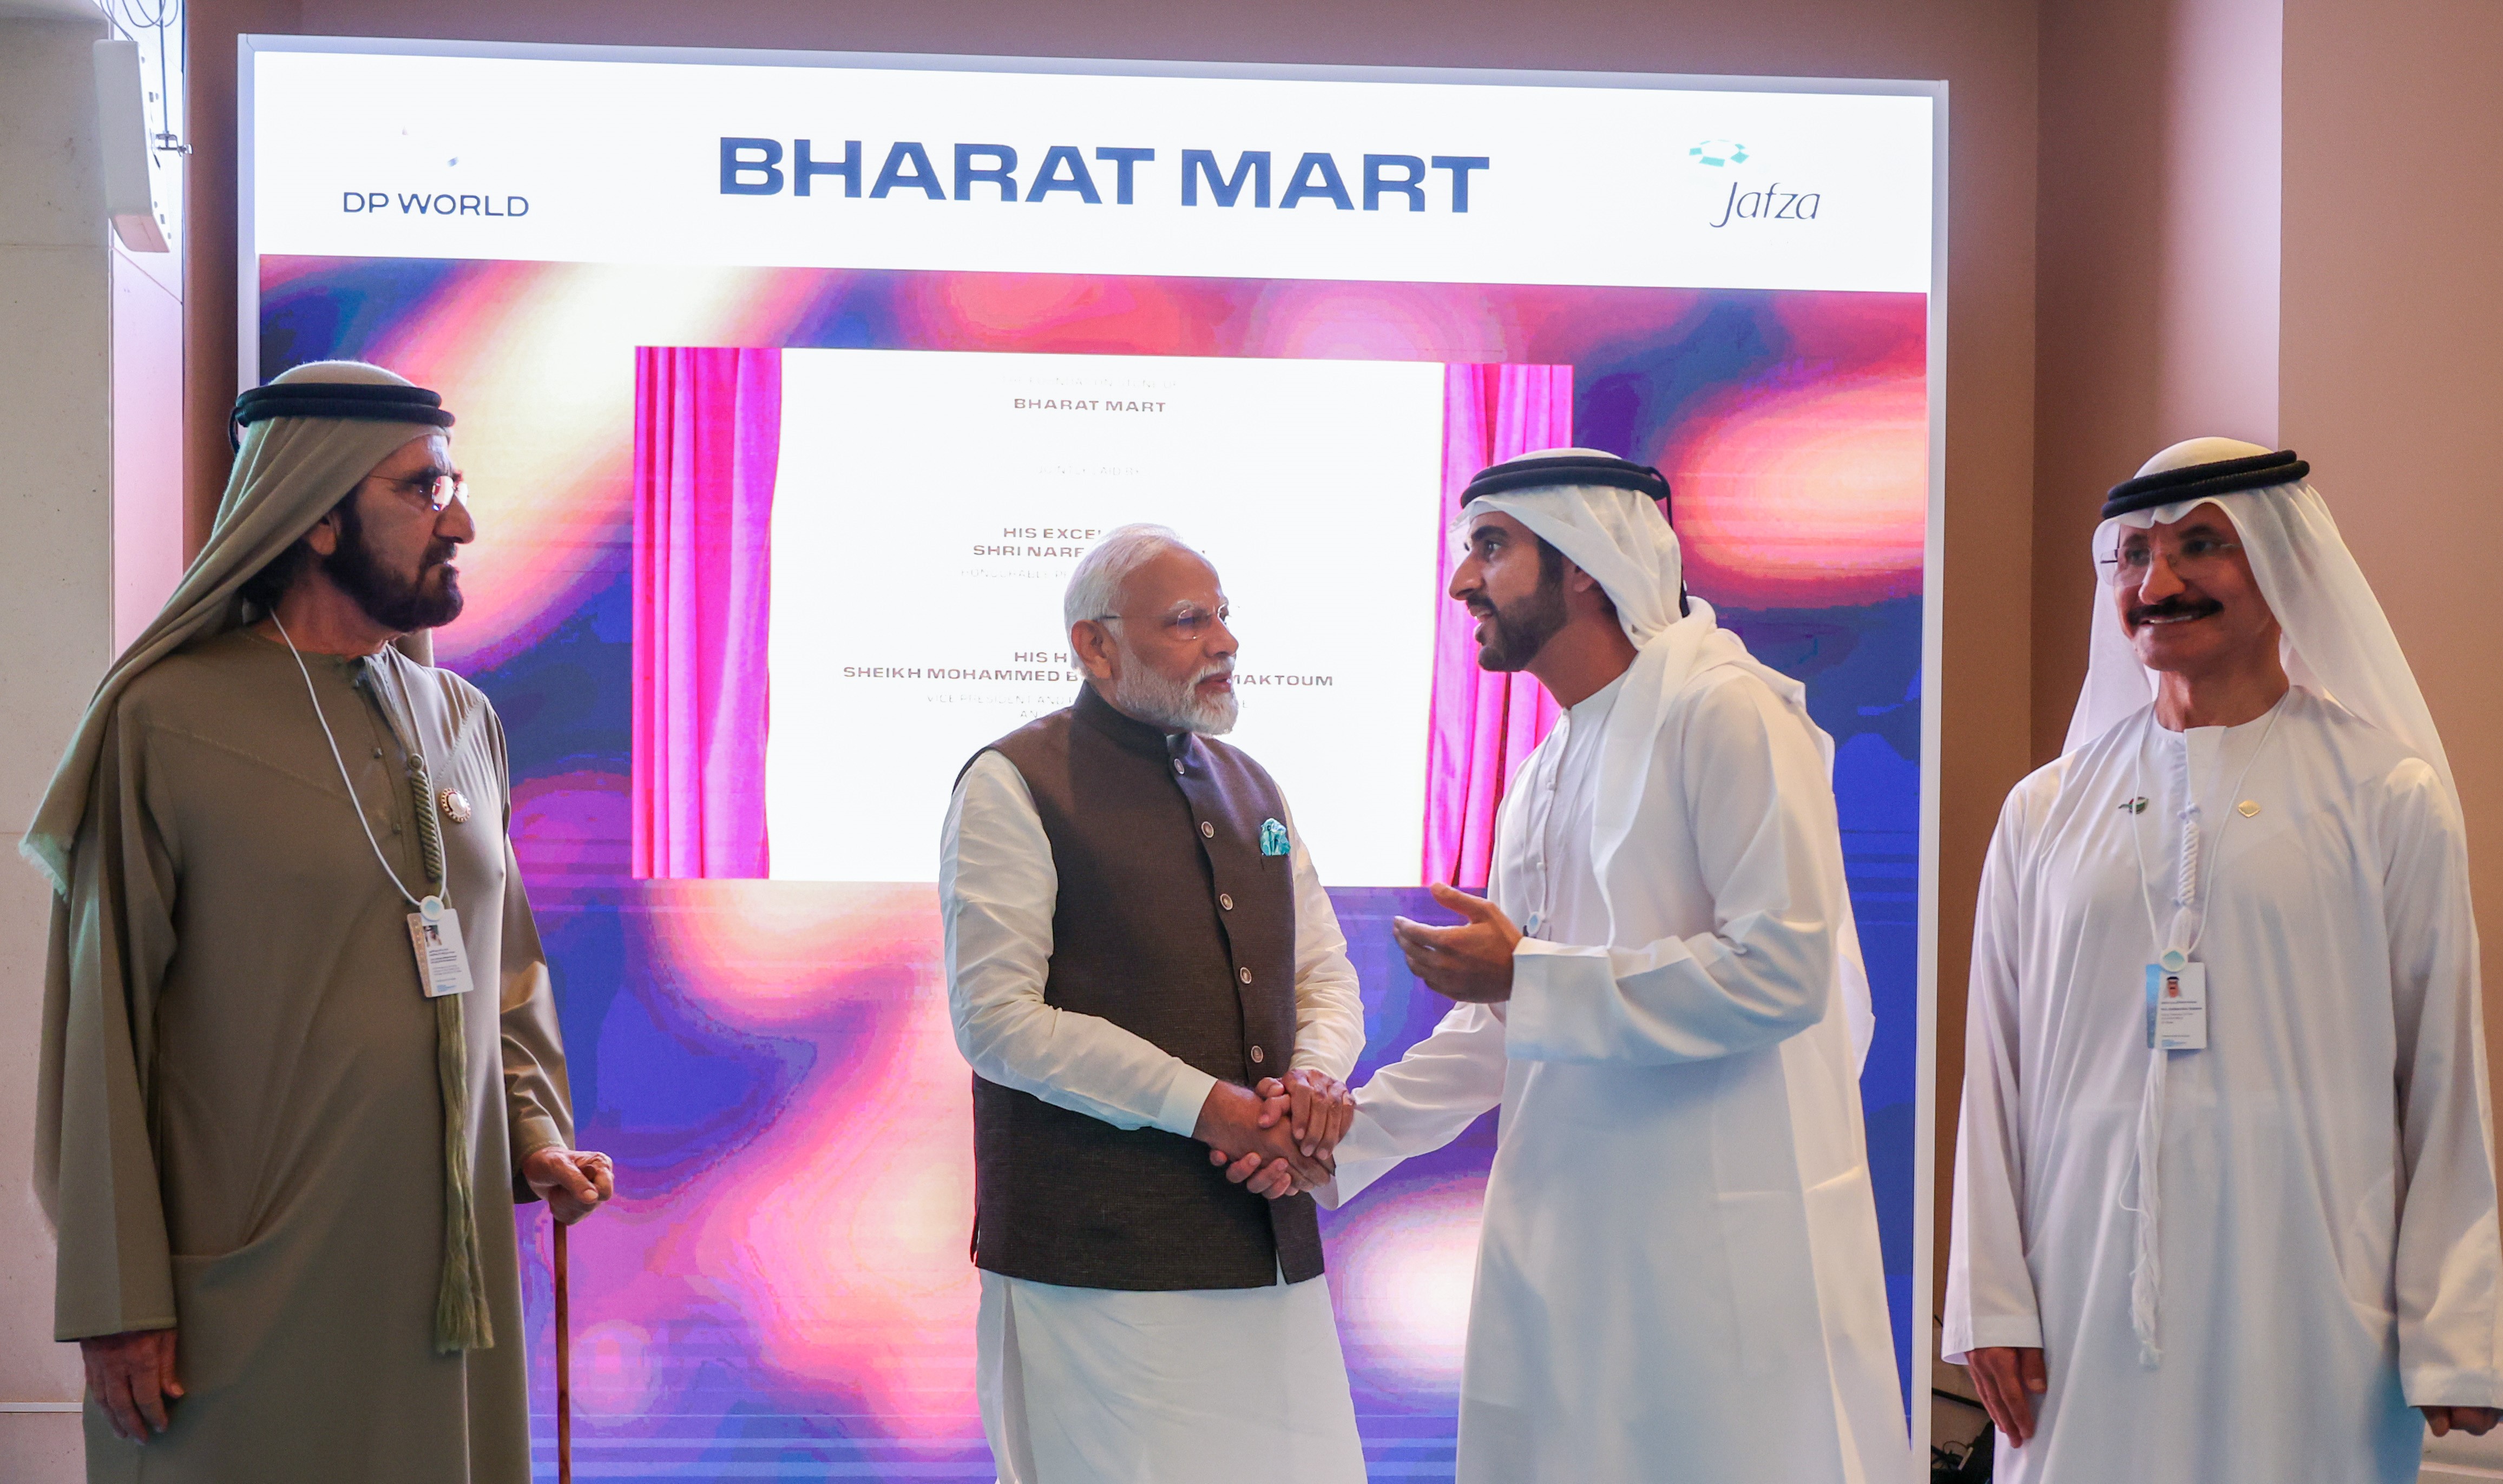 India to open Bharat Mart in Dubai as country plans to become exports hub